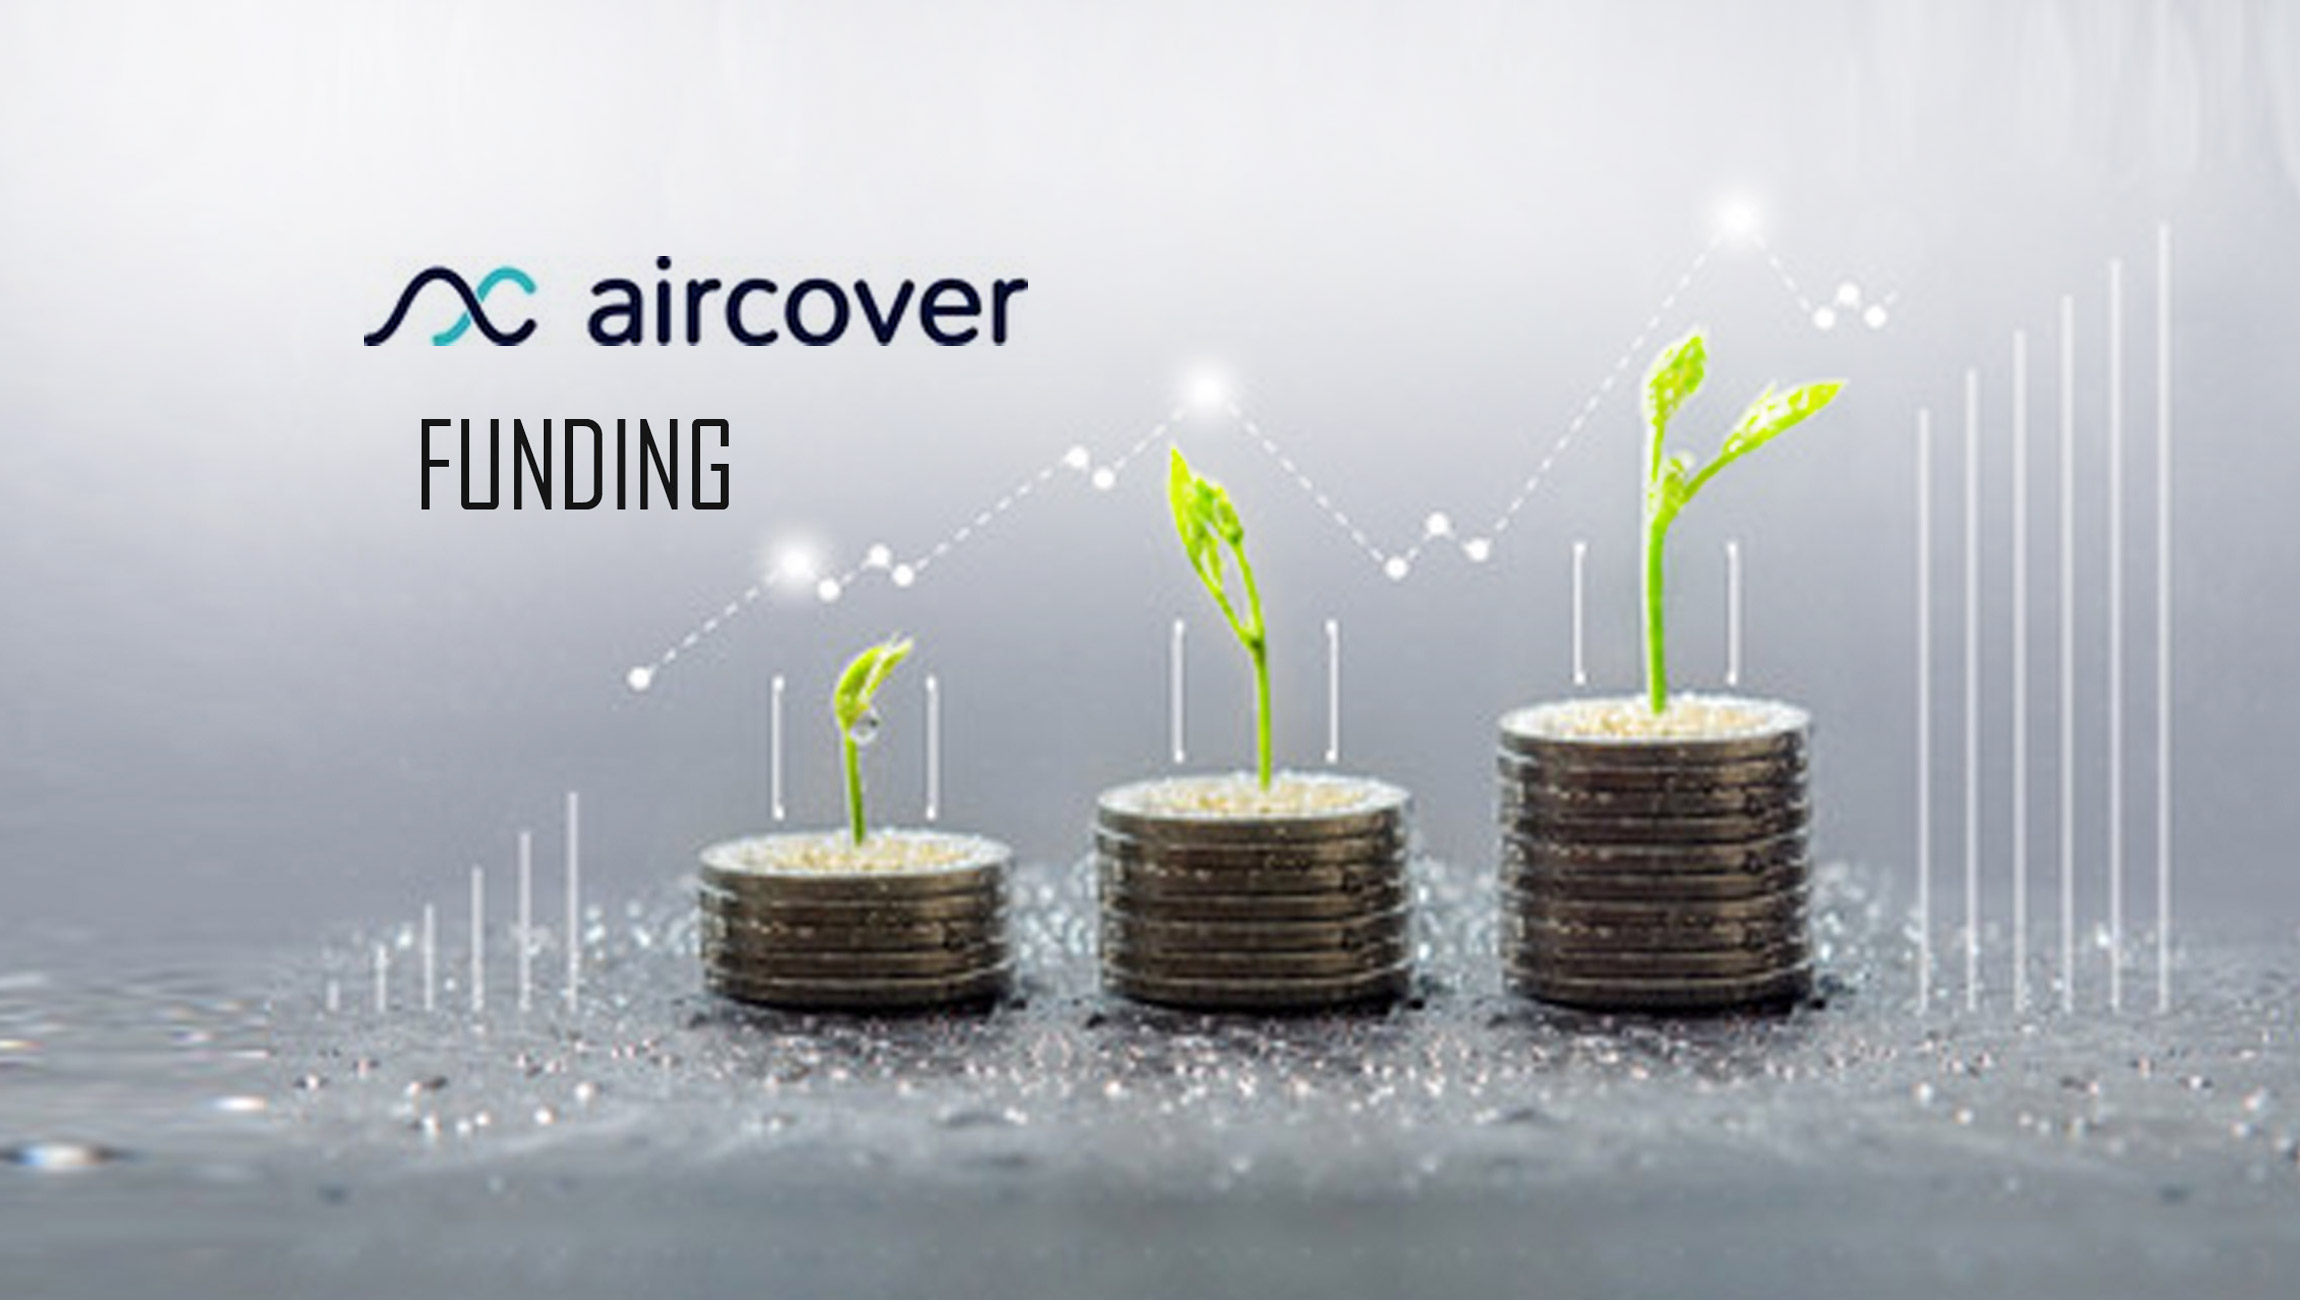 Aircover Raises $3M Seed Funding Led by Defy Partners